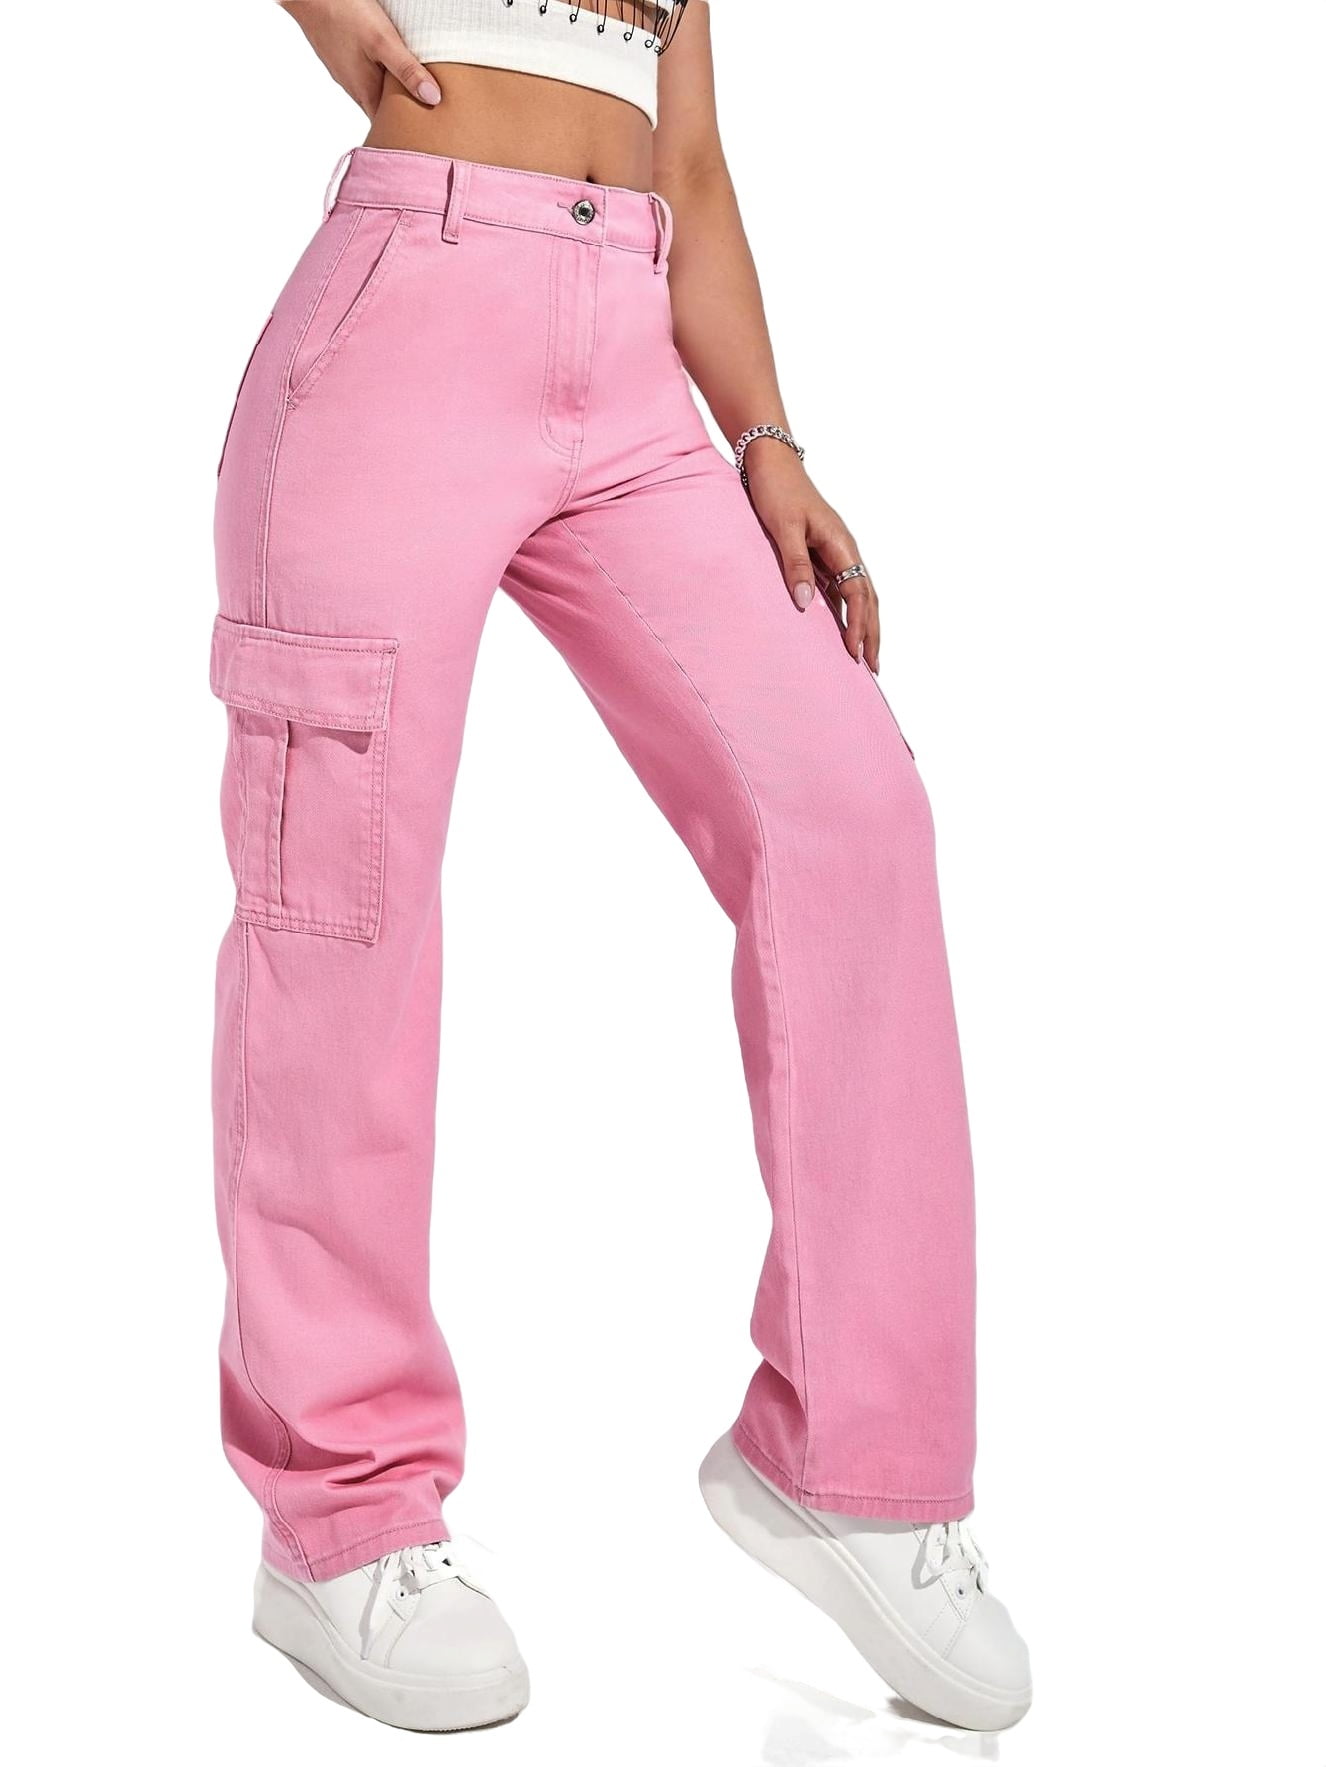 Buy the Womens Pink Denim Medium Wash Pockets Stretch Cropped Jeans Size  12/31 | GoodwillFinds